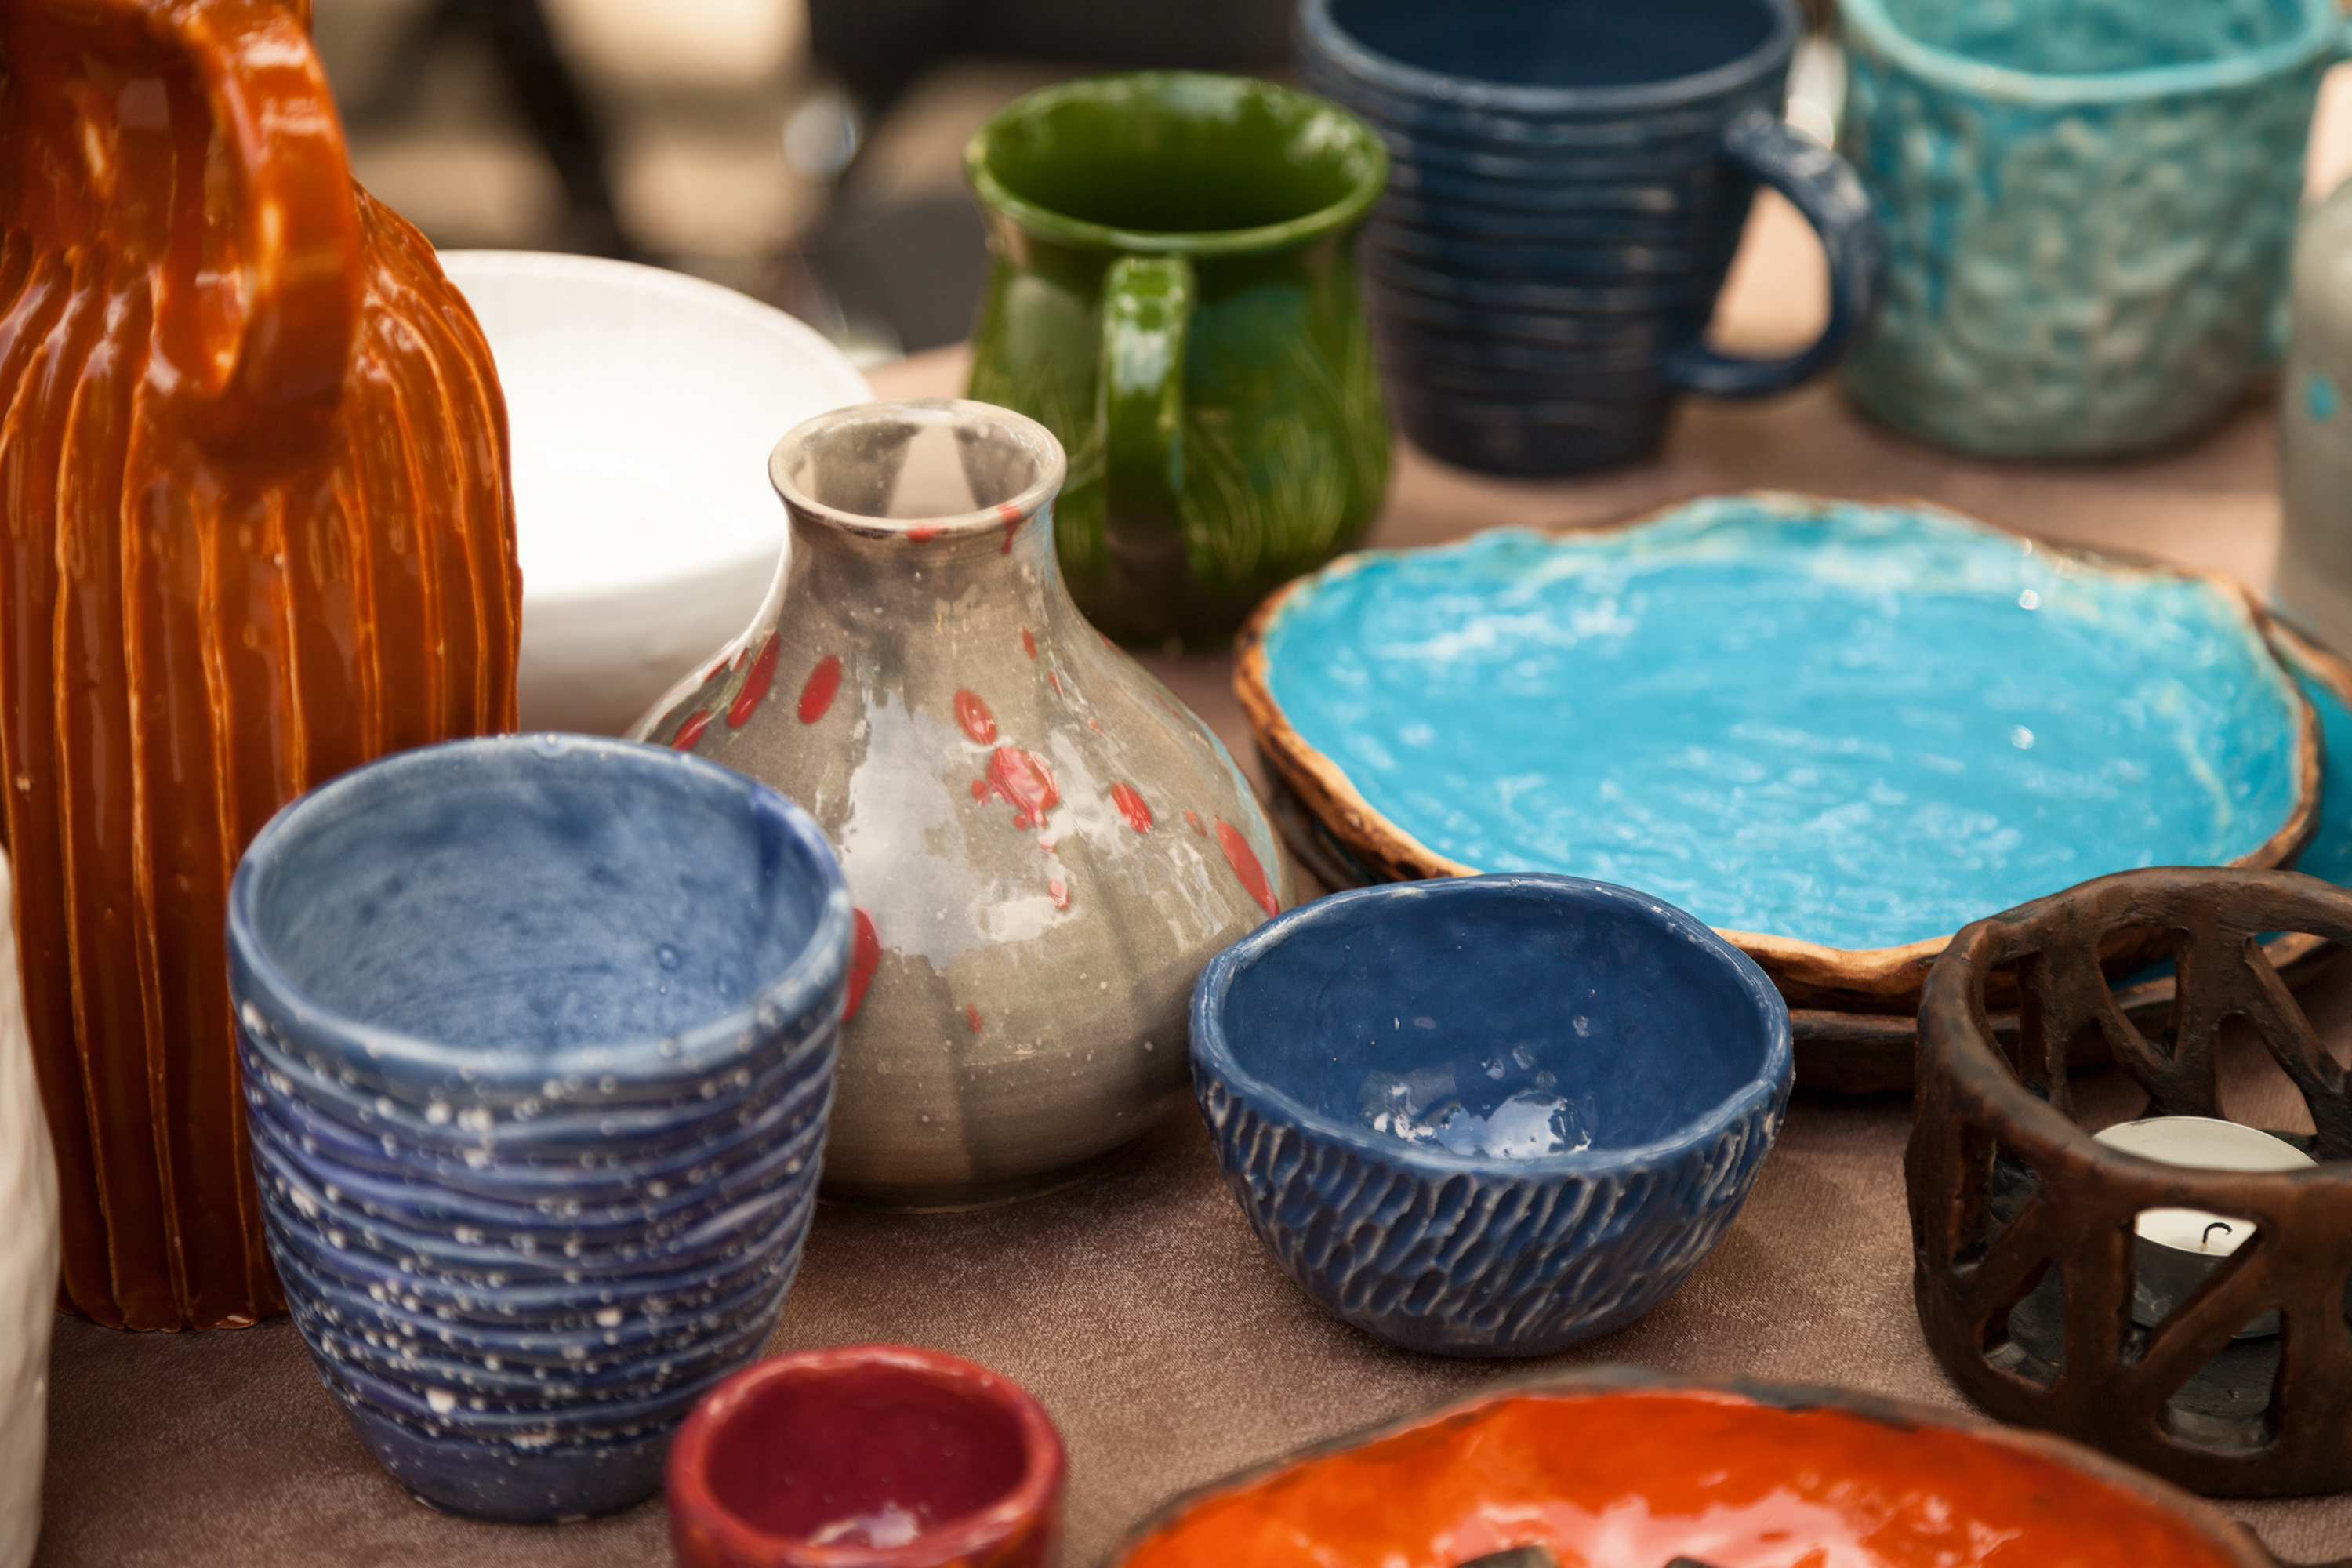 Shop for the Finest Local Pottery around Cambridge